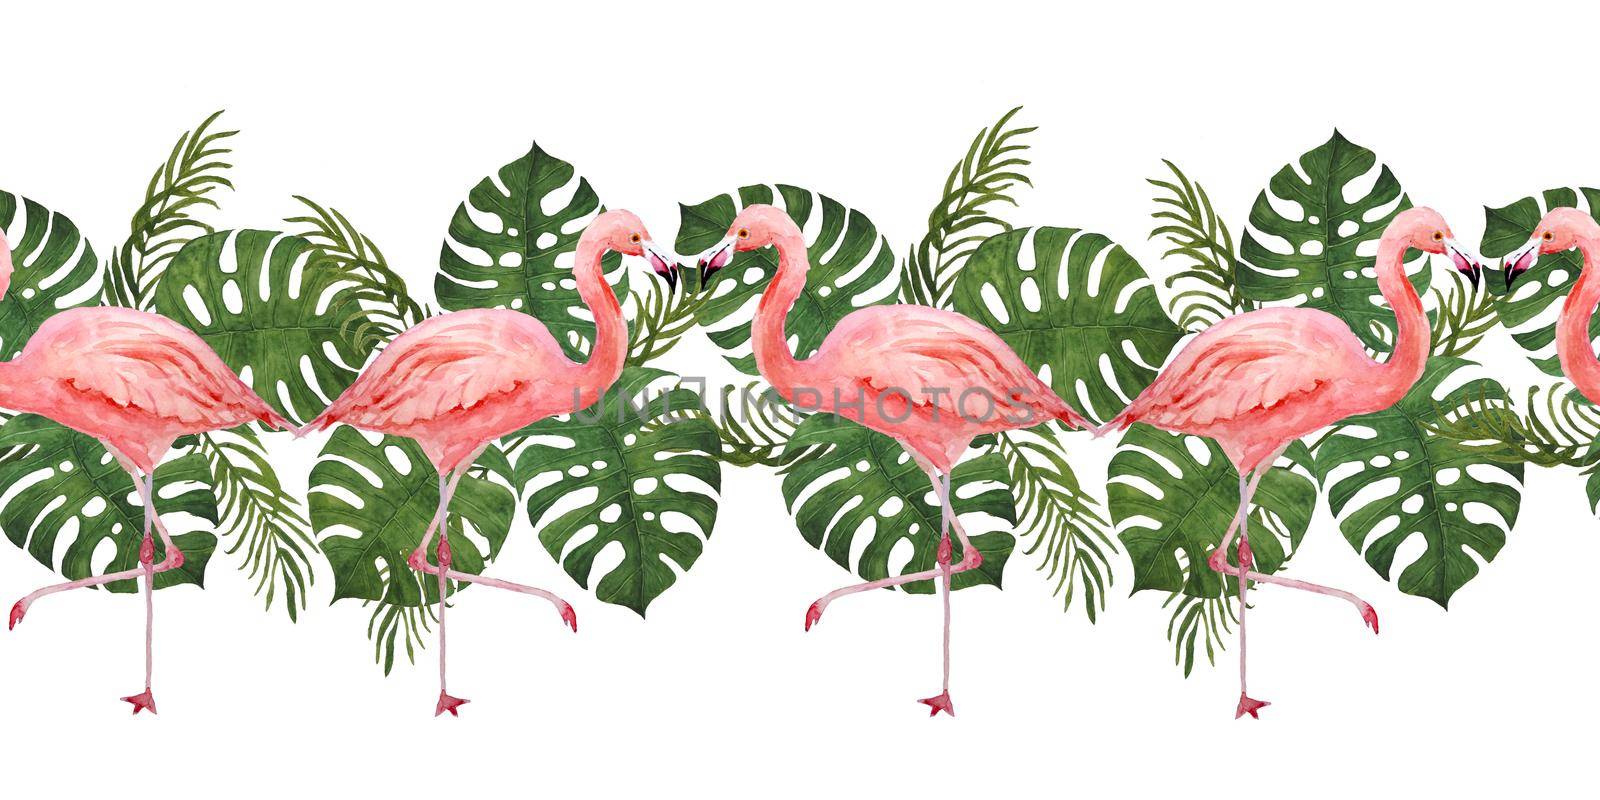 Watercolor hand drawn seamless horizontal border with pink flamingo bird and tropical green monstera palm jungle leaves on background. Summer vacation holiday concept. Print for card invitation t-shirt decor. by Lagmar